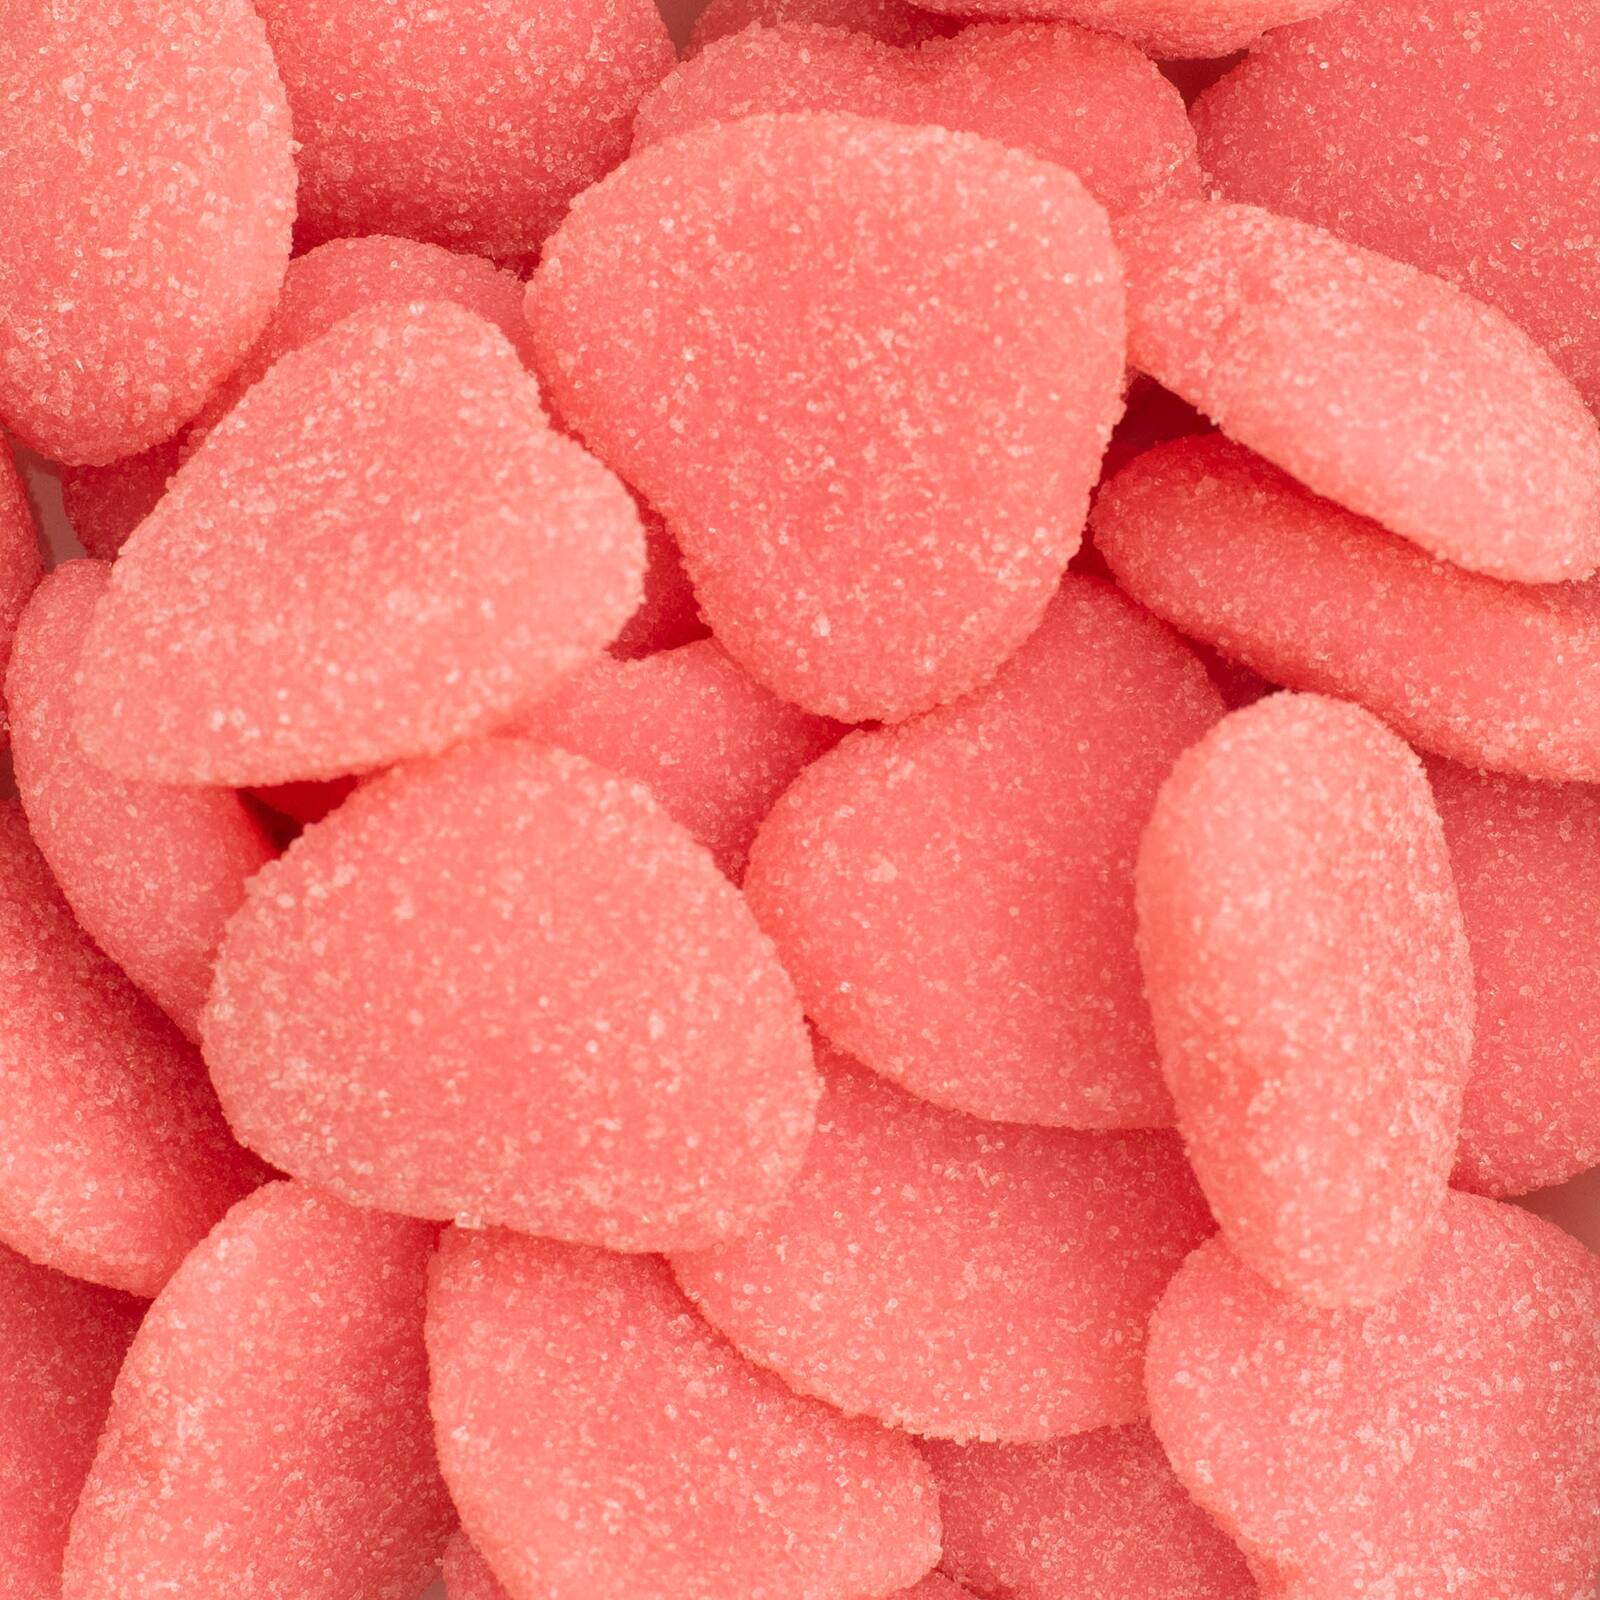 Sweet Tooth Fairy Red & Pink Hearts Candy Shapes | Michaels